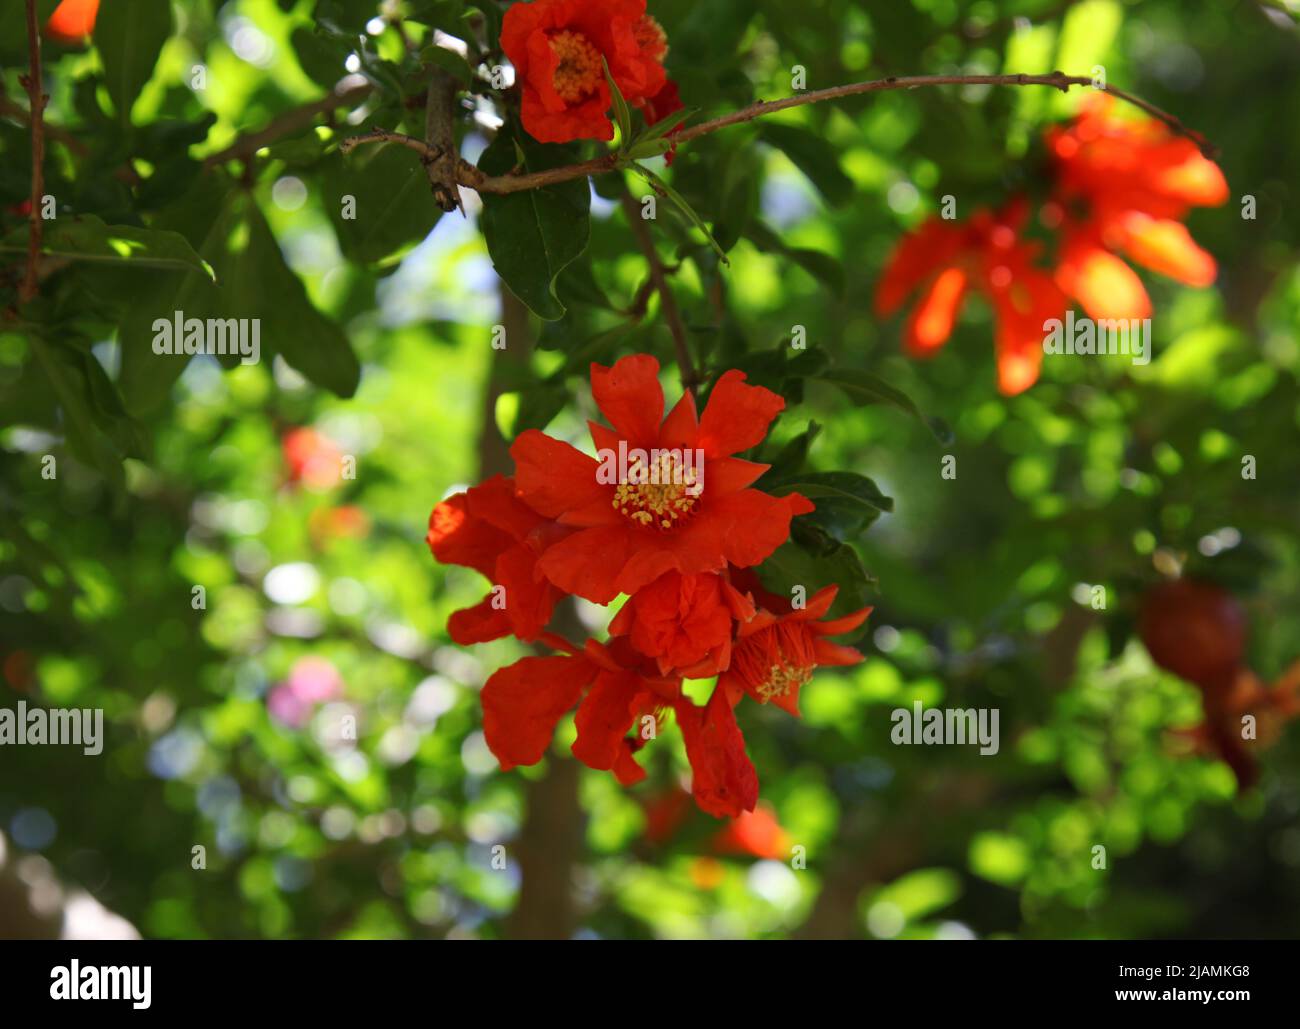 Pomegranate flower on tree branches. Close up. Stock Photo